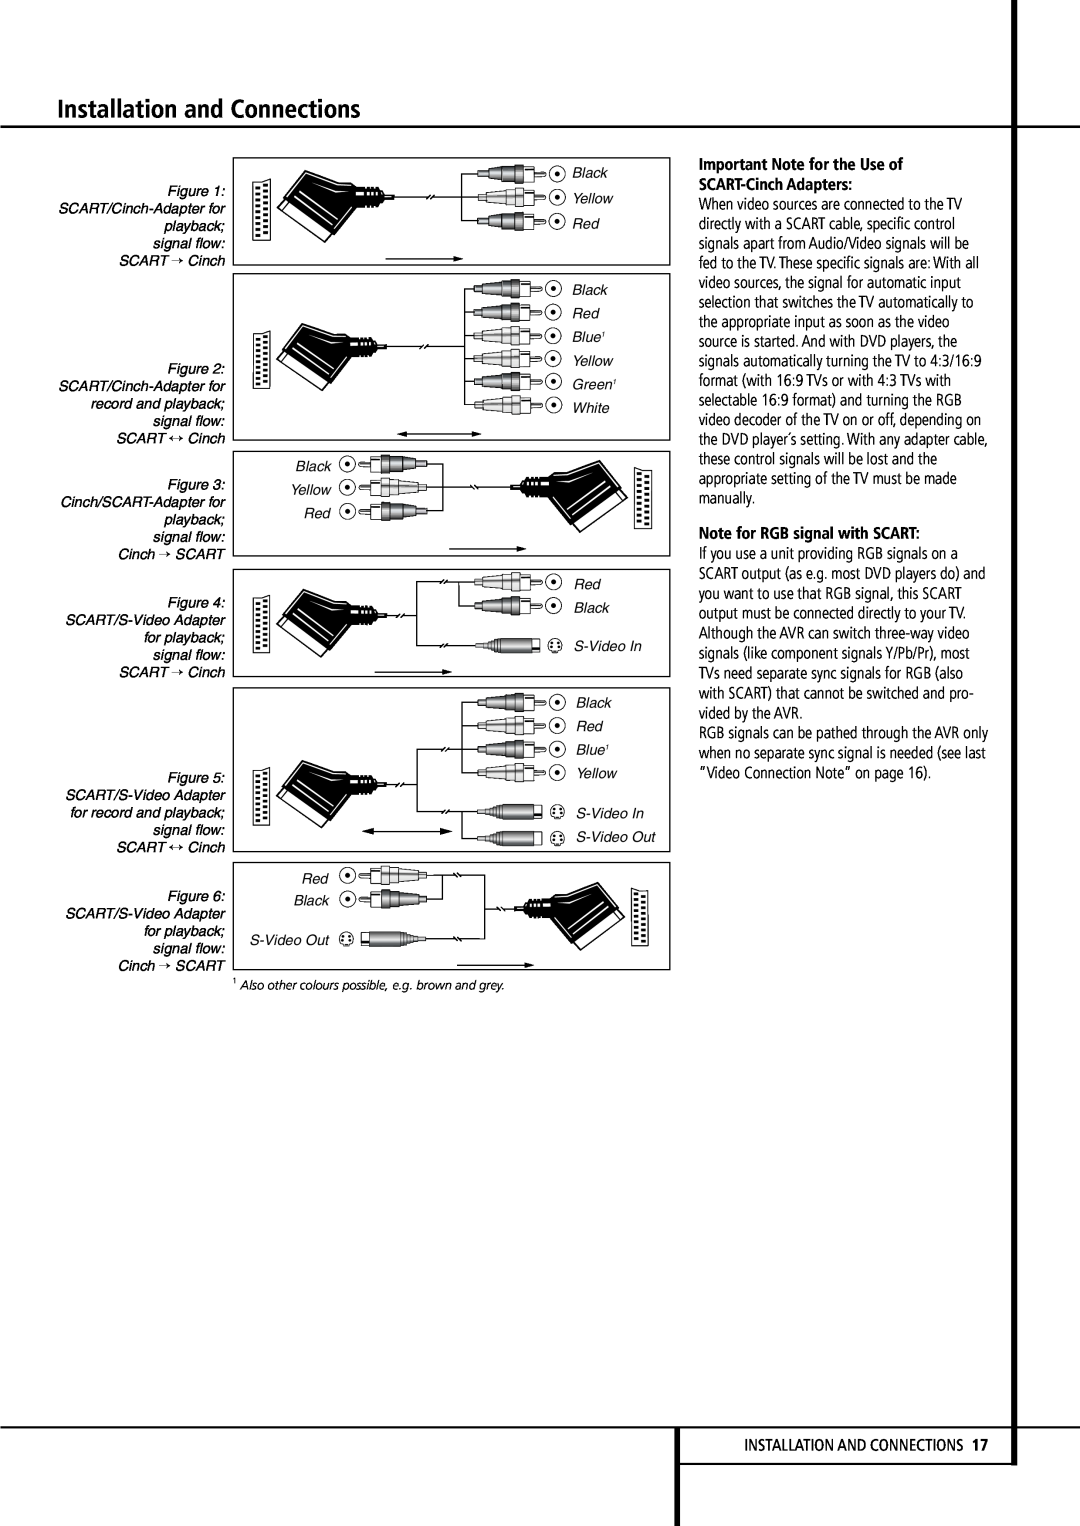 Harman-Kardon AVR 630 owner manual Important Note for the Use of SCART-CinchAdapters, Note for RGB signal with SCART 